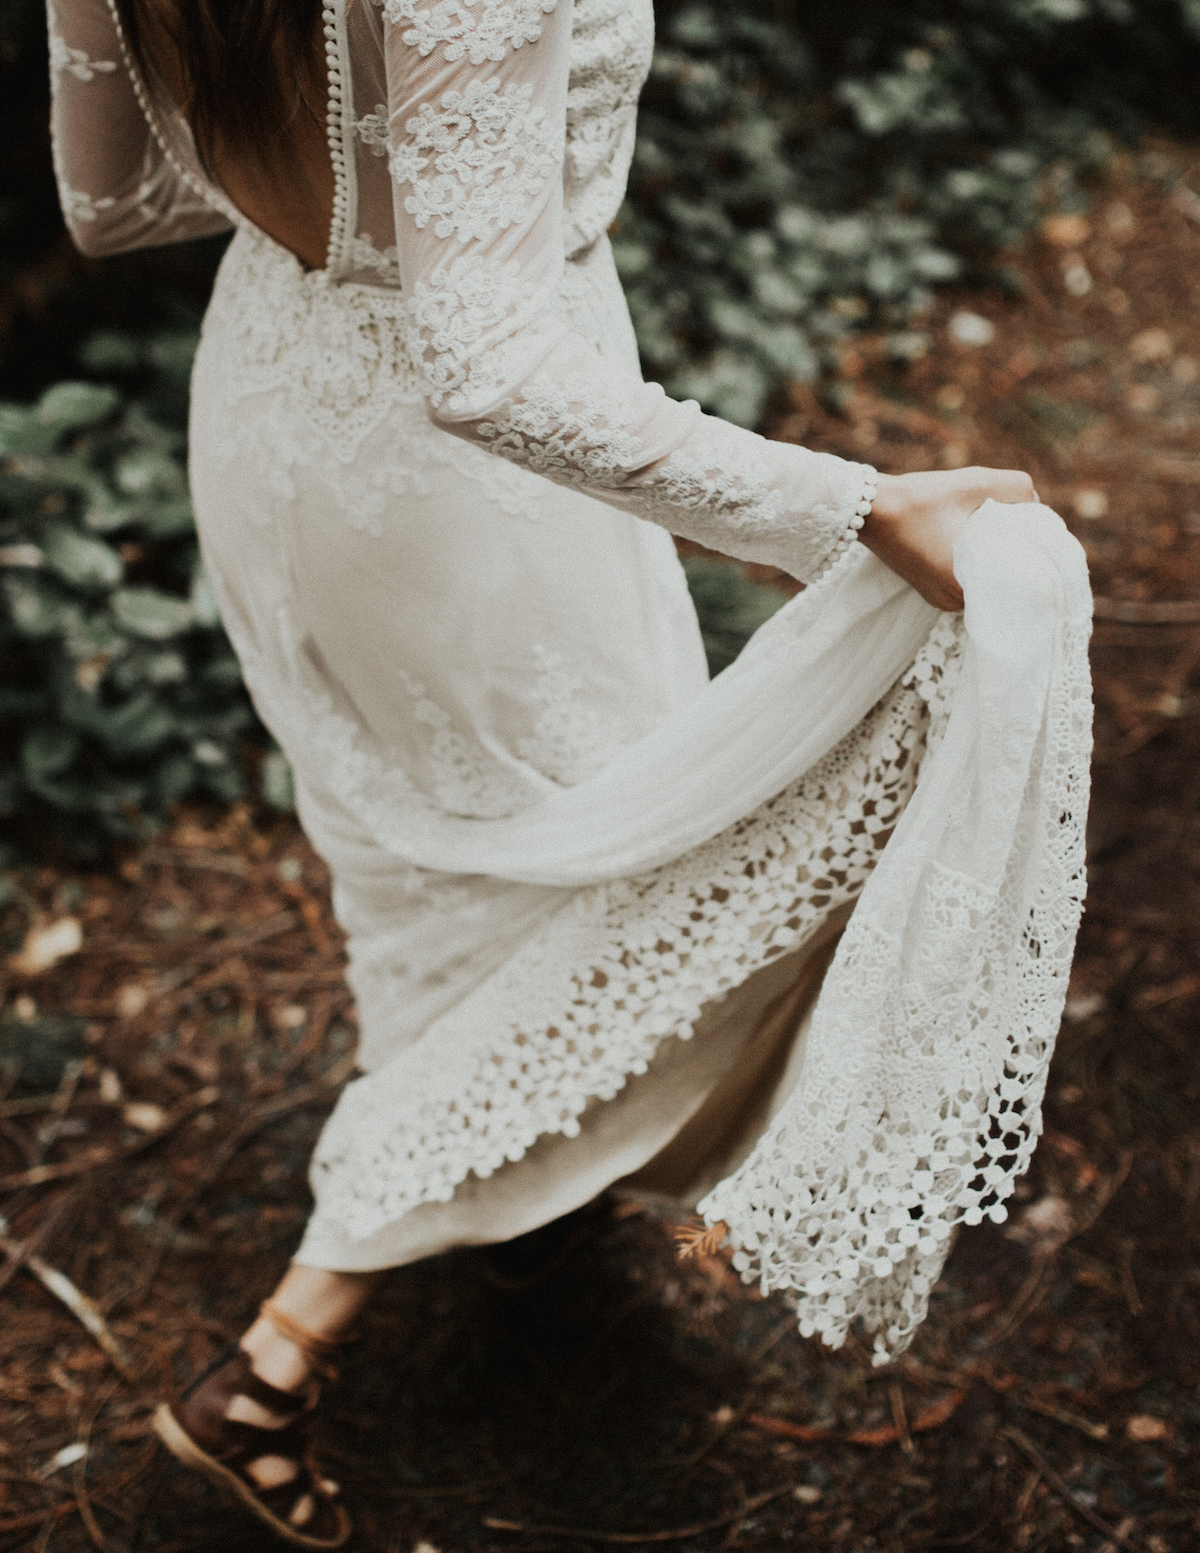 dreamers-and-lovers-aurora-bohemian-wedding-dress-with-textured-lace-detailing-photographed-by-california-based-anni-graham